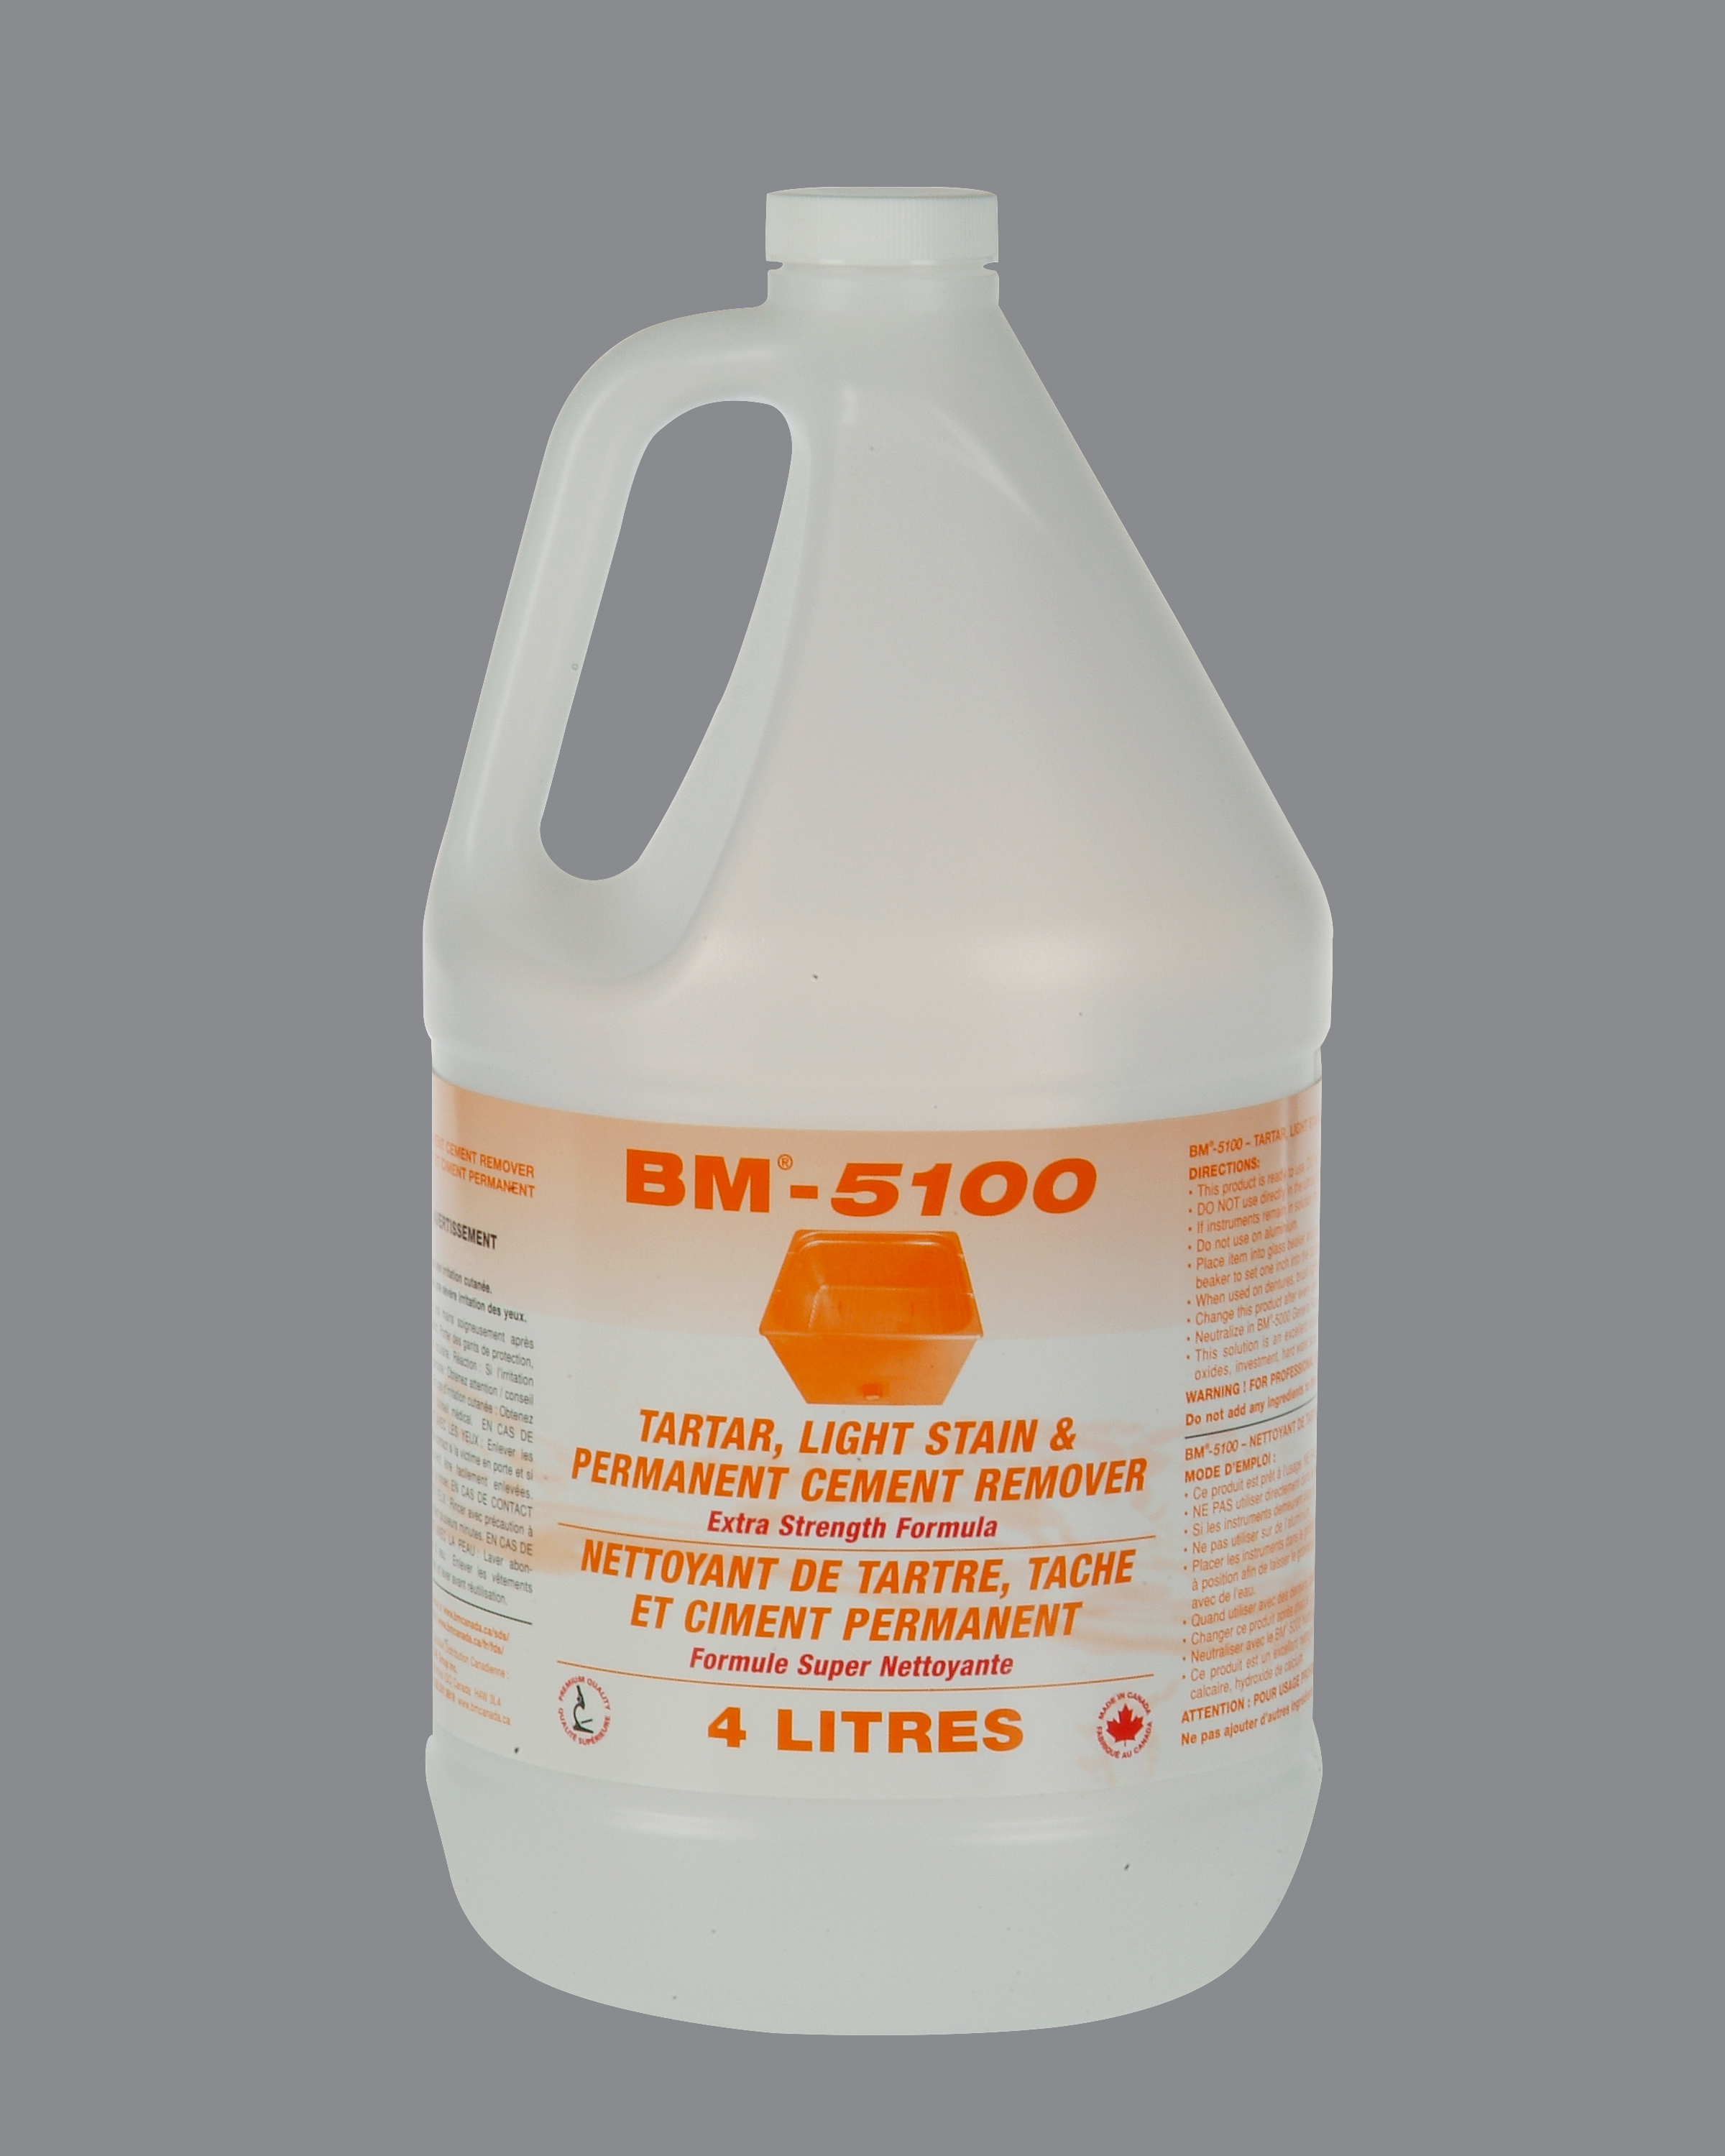 BM-5100 TARTAR LIGHT STAIN AND PERMANENT CEMENT REMOVER